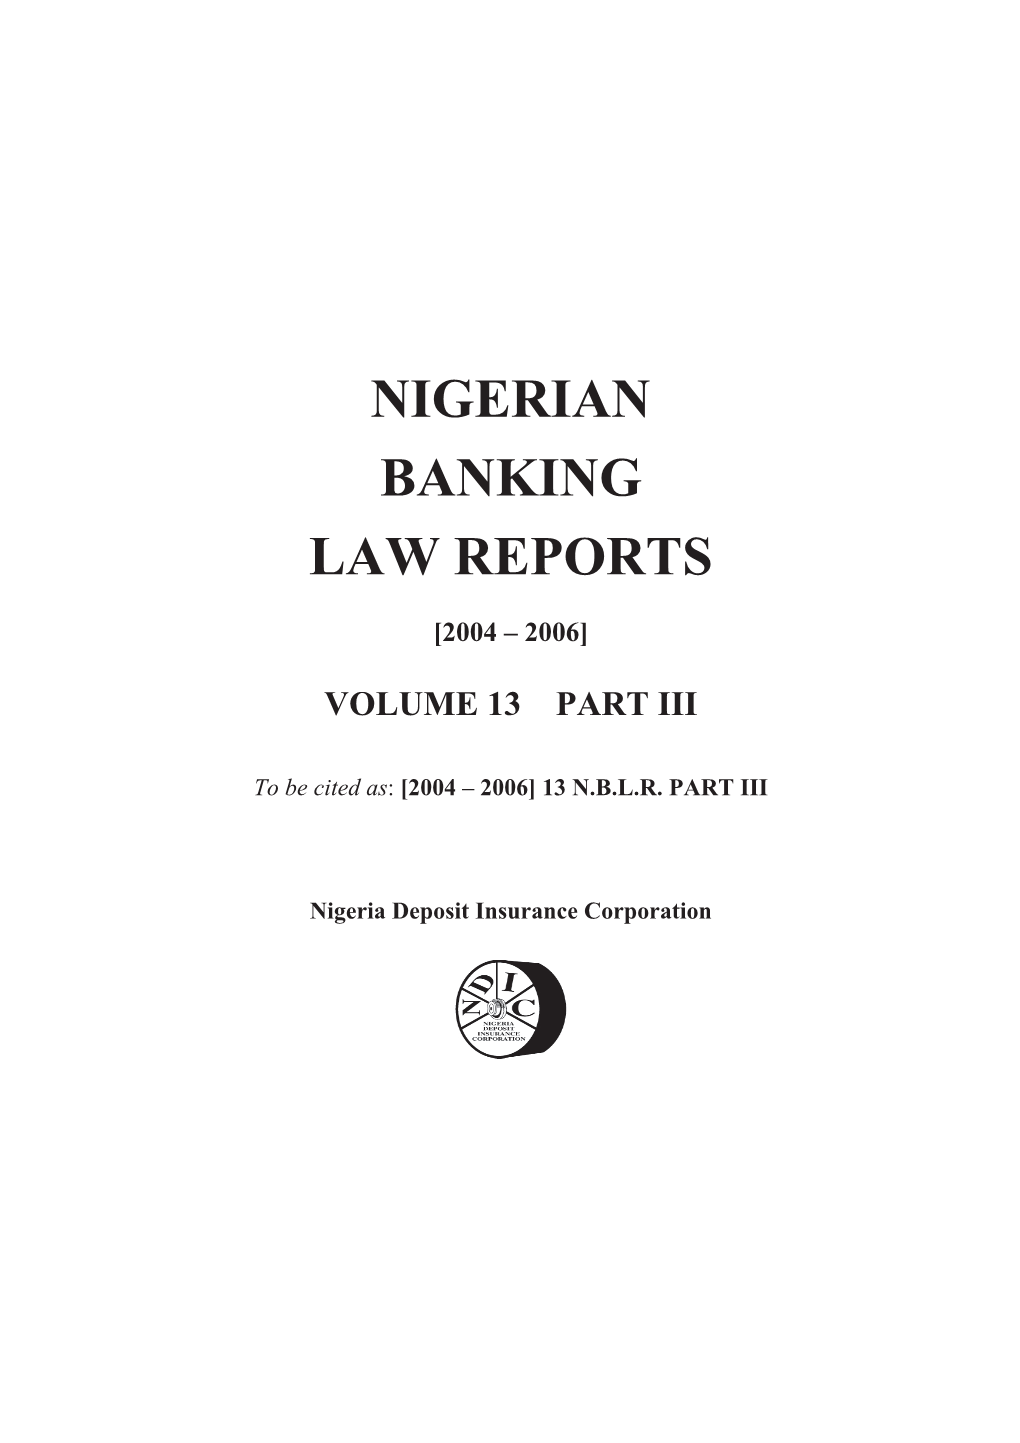 Nigerian Banking Law Reports